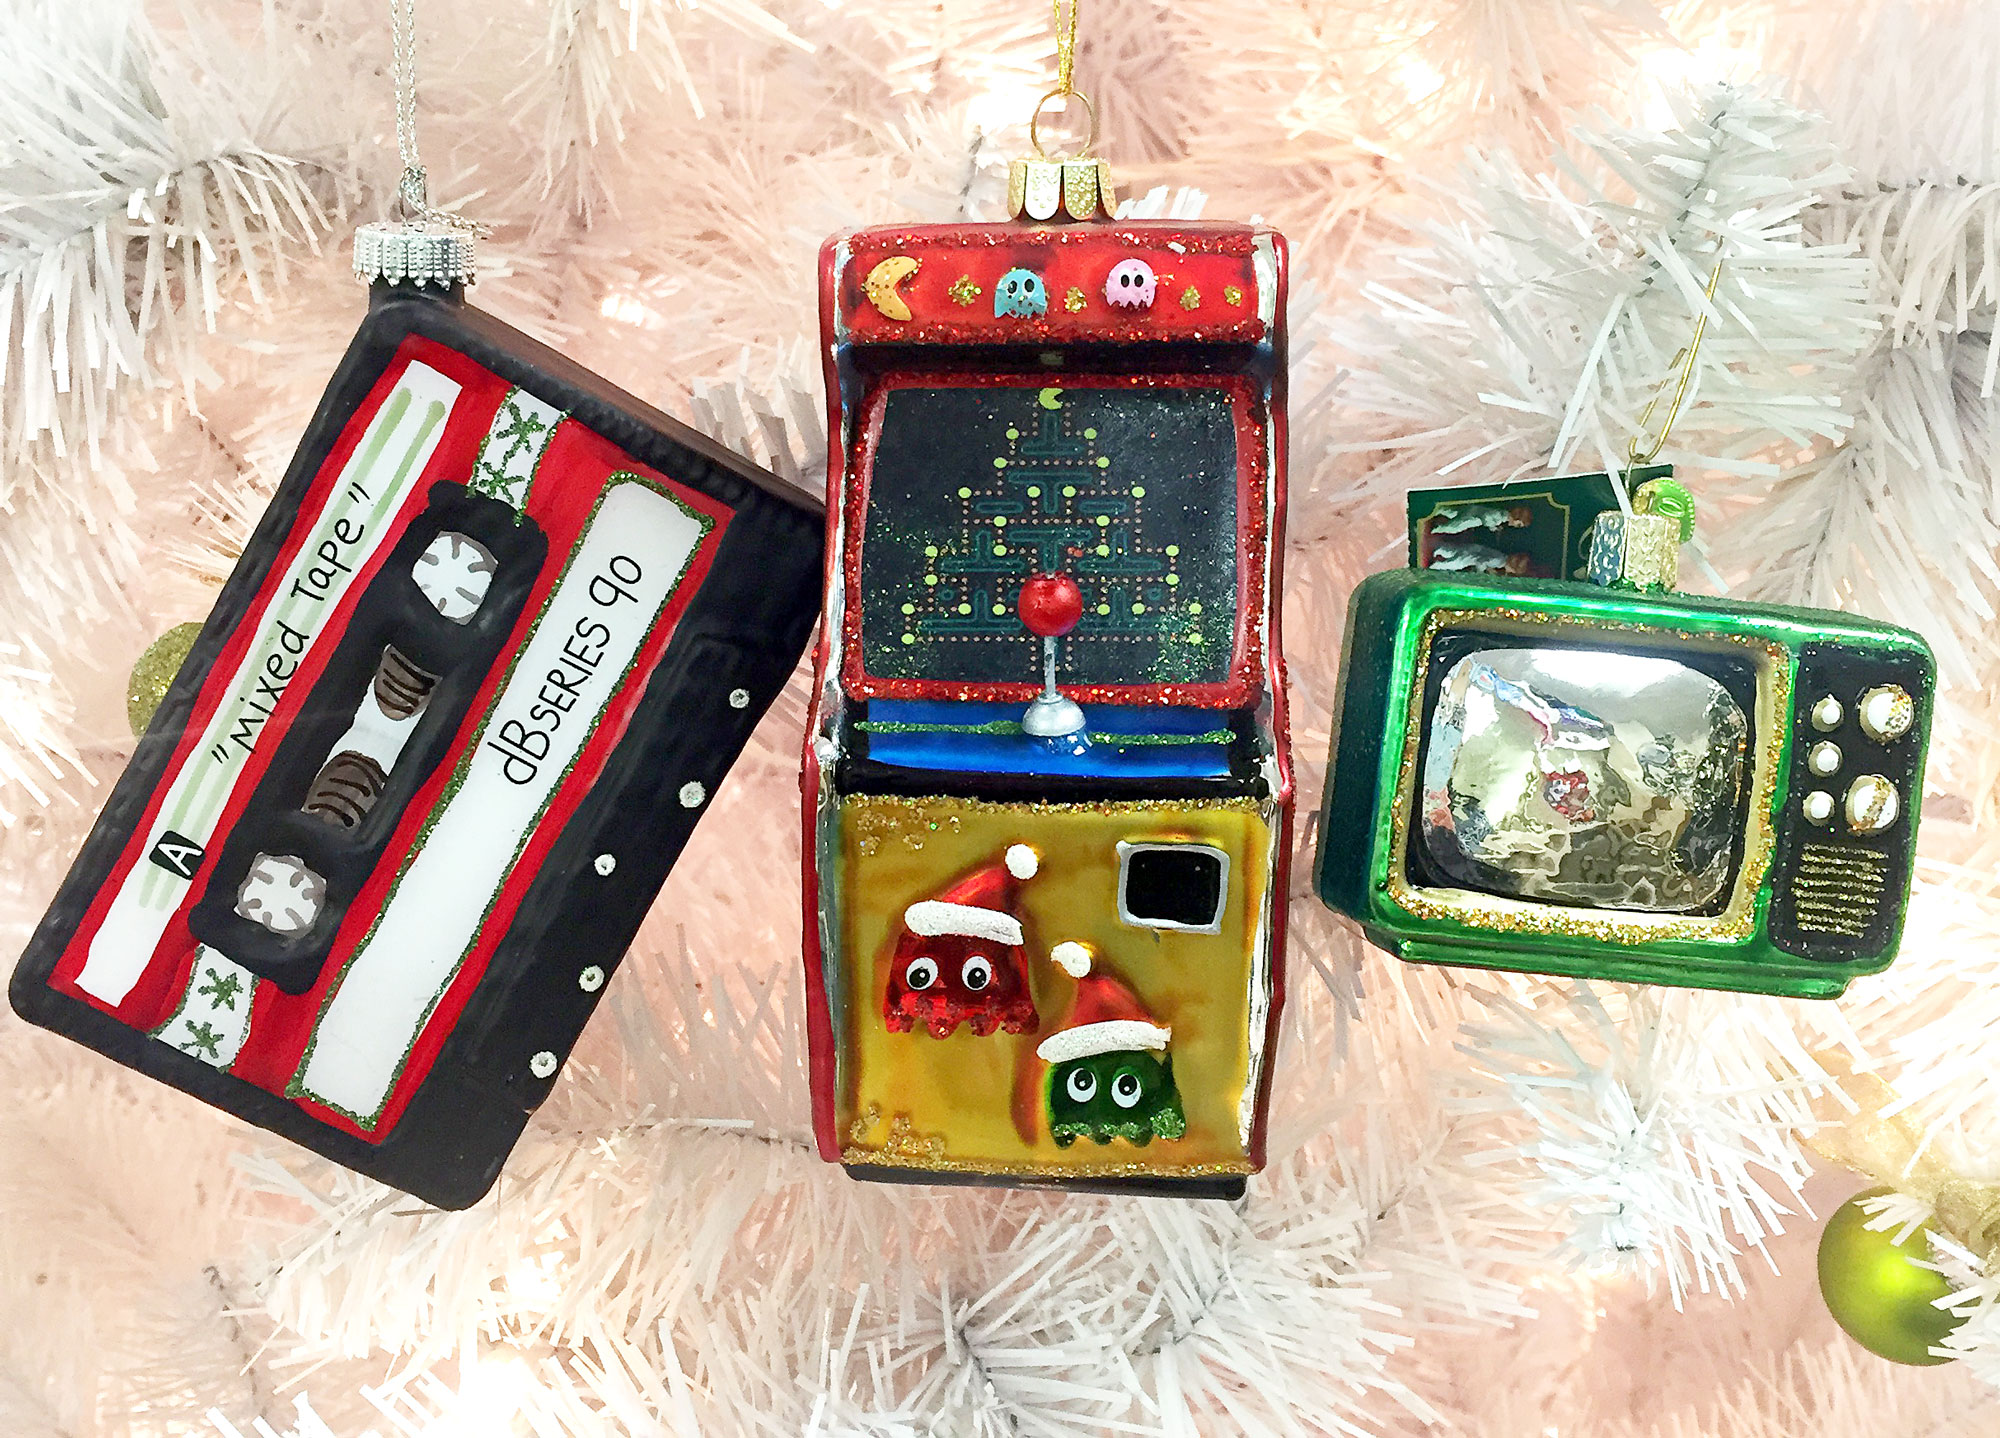 Throw Back Thursday Ornaments with cassette tape, Pac Man arcade, and retro television | OrnamentShop.com